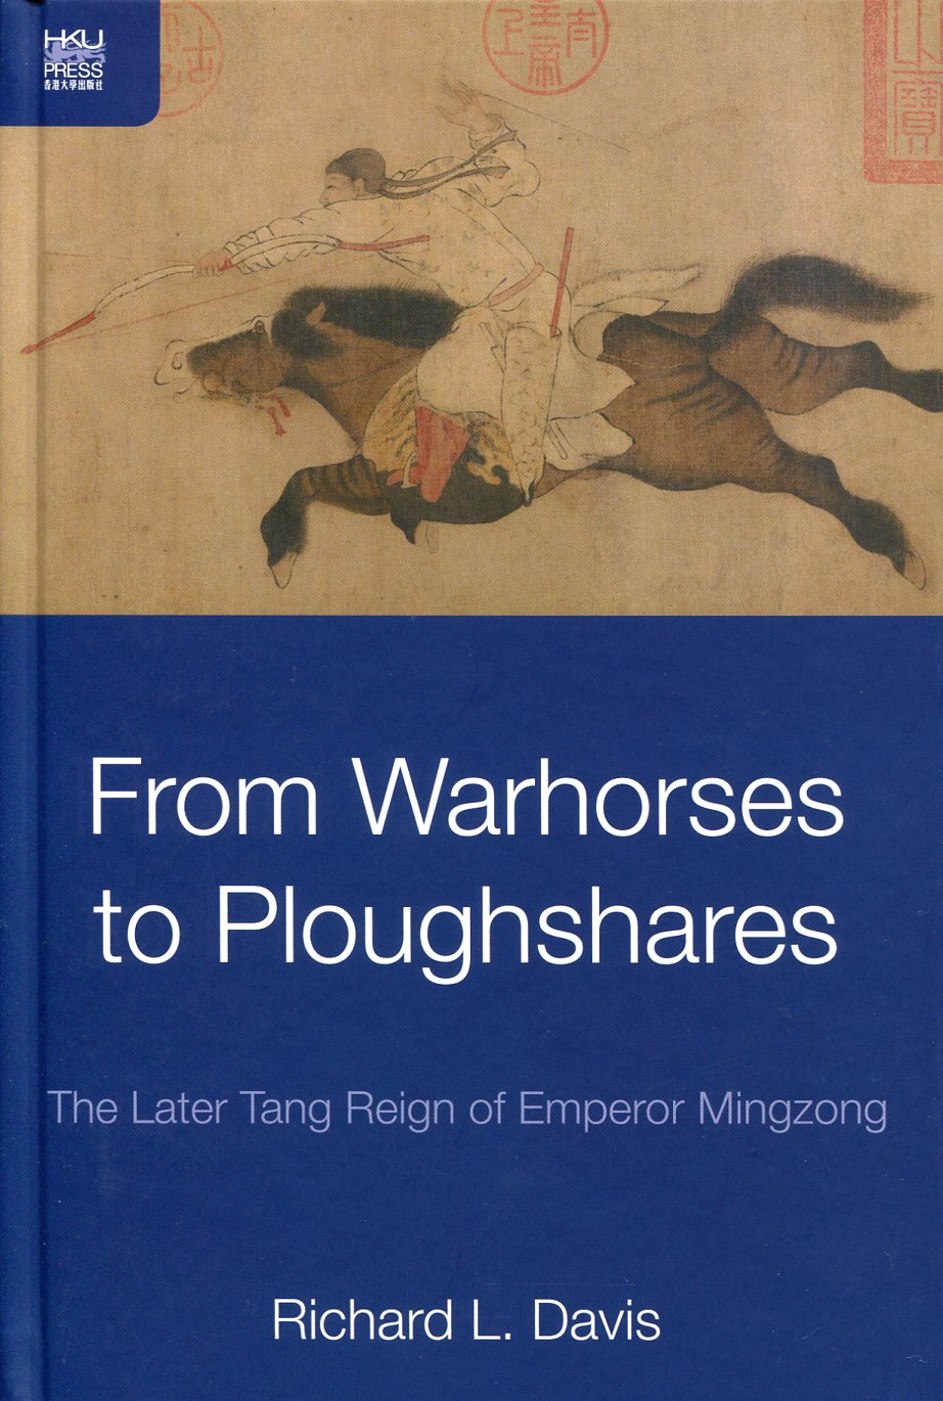 From Warhorses to Ploughshares：The Later Tang Reign of Emperor Mingzong